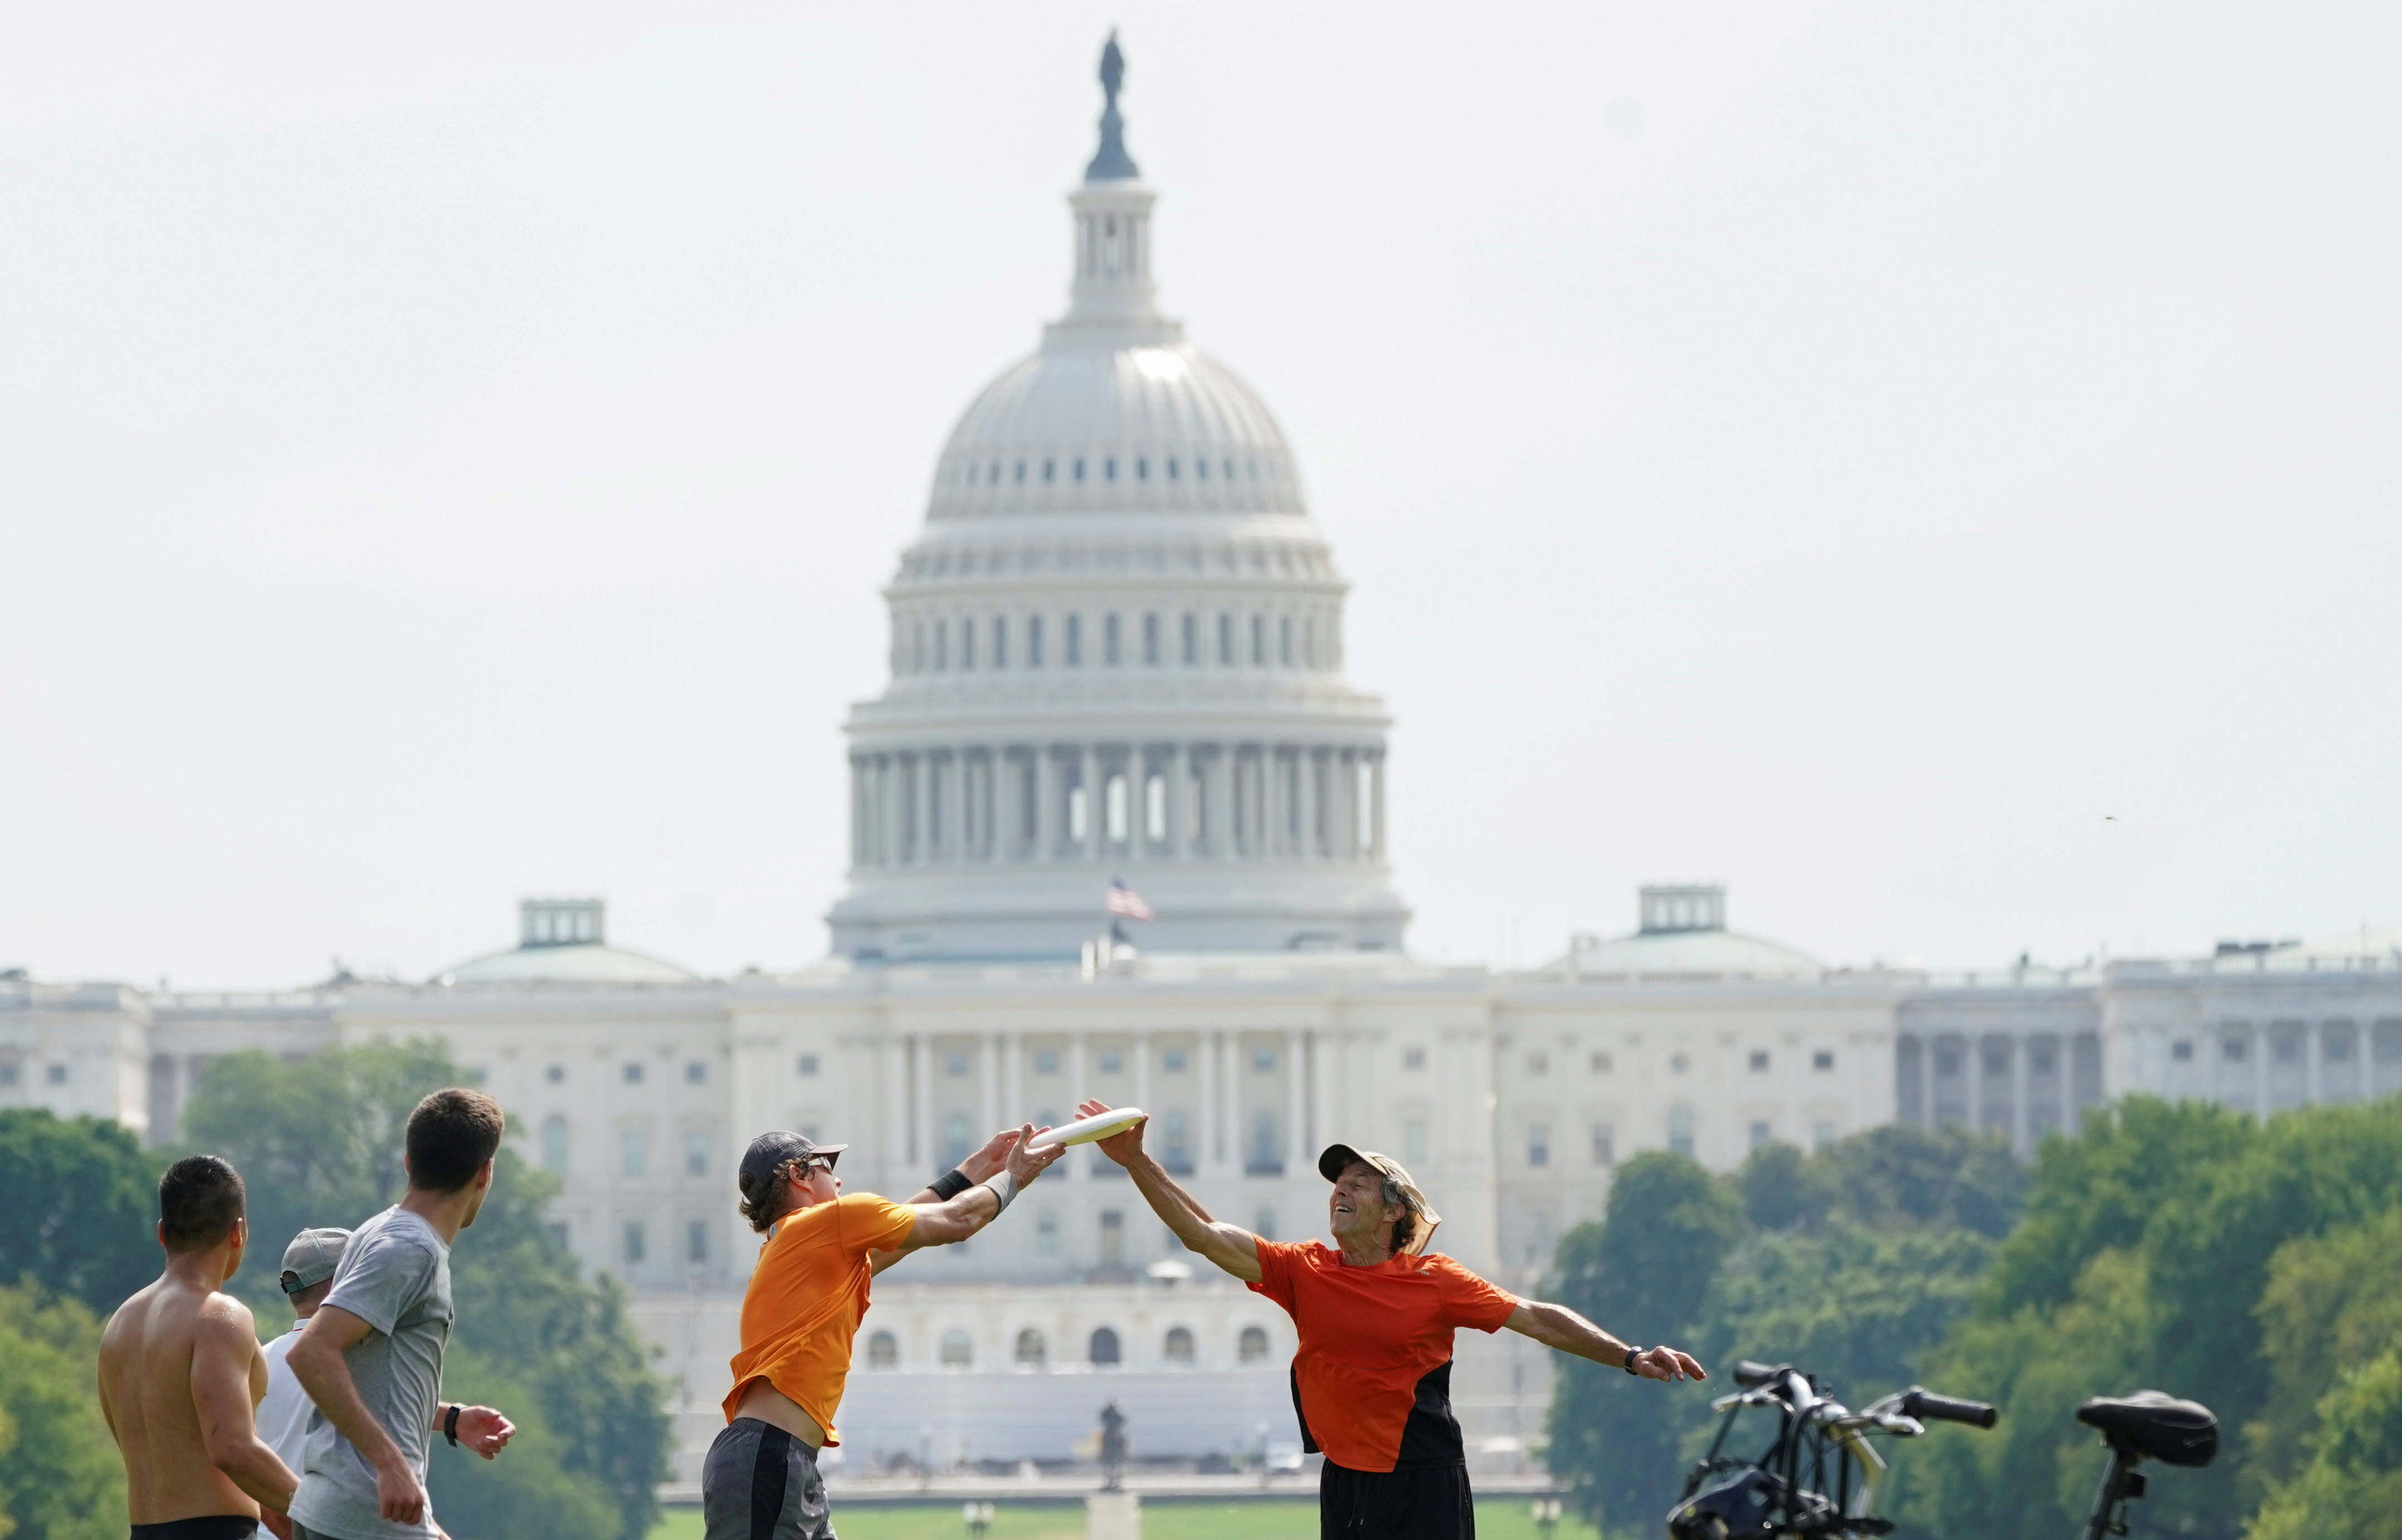 With the U.S. Capitol in the background, players battle for possession during a game of ultimate frisbee on the National Mall during a heat wave in Washington, U.S., July 20, 2020.  REUTERS/Kevin Lamarque     TPX IMAGES OF THE DAY